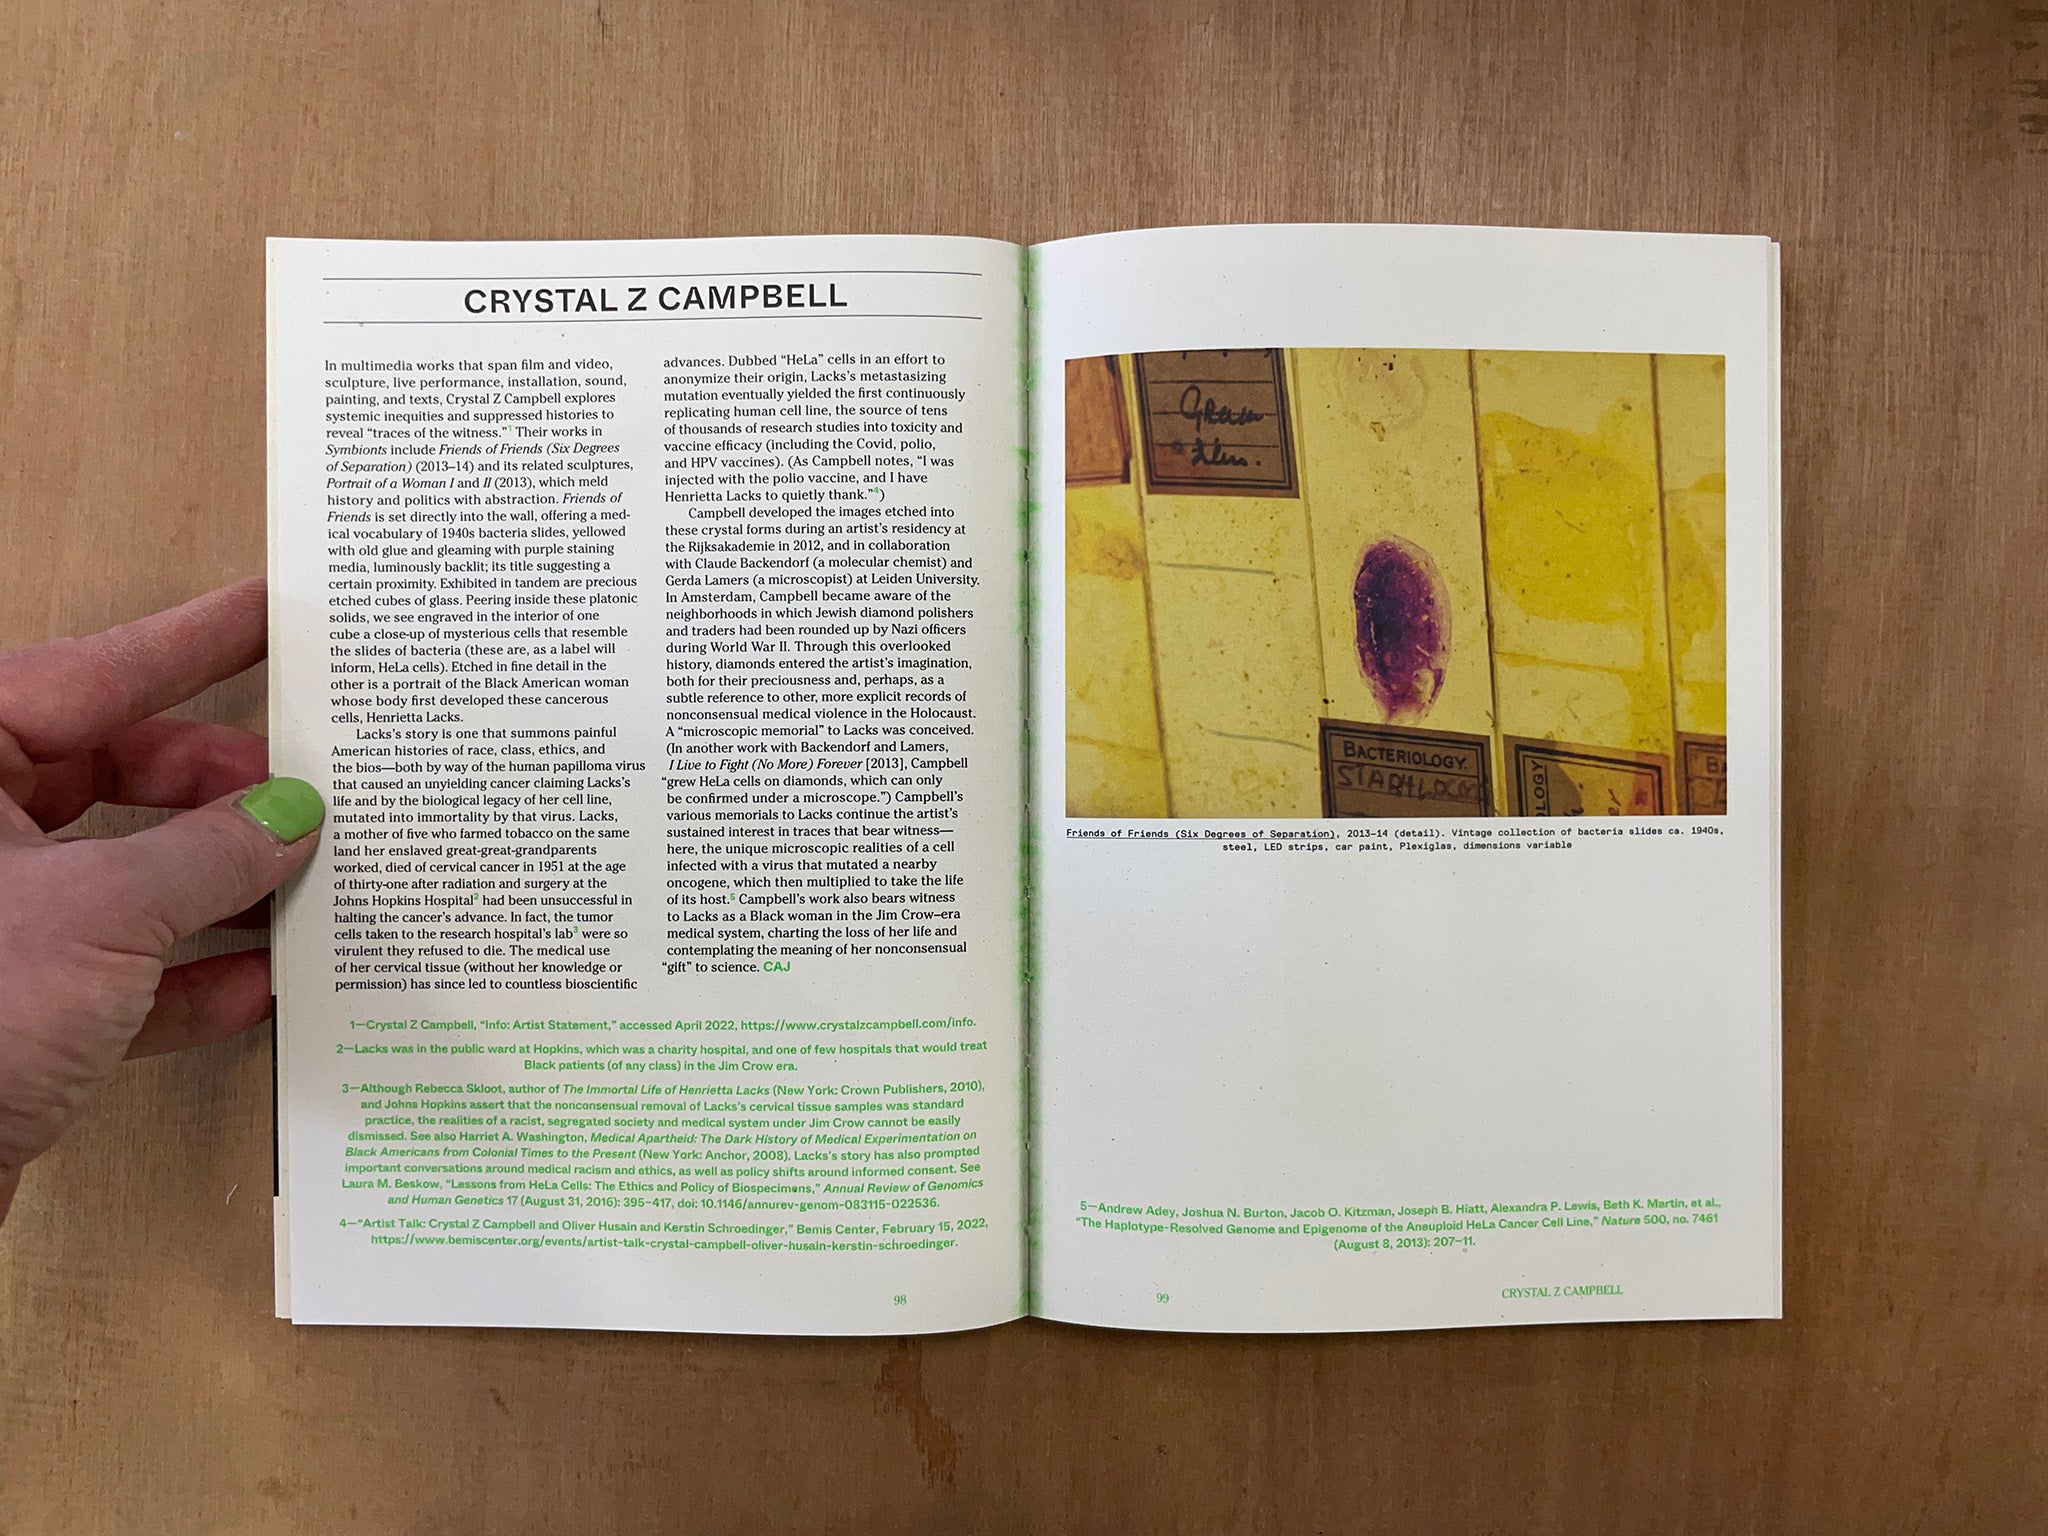 SYMBIONTS: CONTEMPORARY ARTISTS AND THE BIOSPHERE Ed. by Caroline A. Jones, Natalie Bell and Selby Nimrod